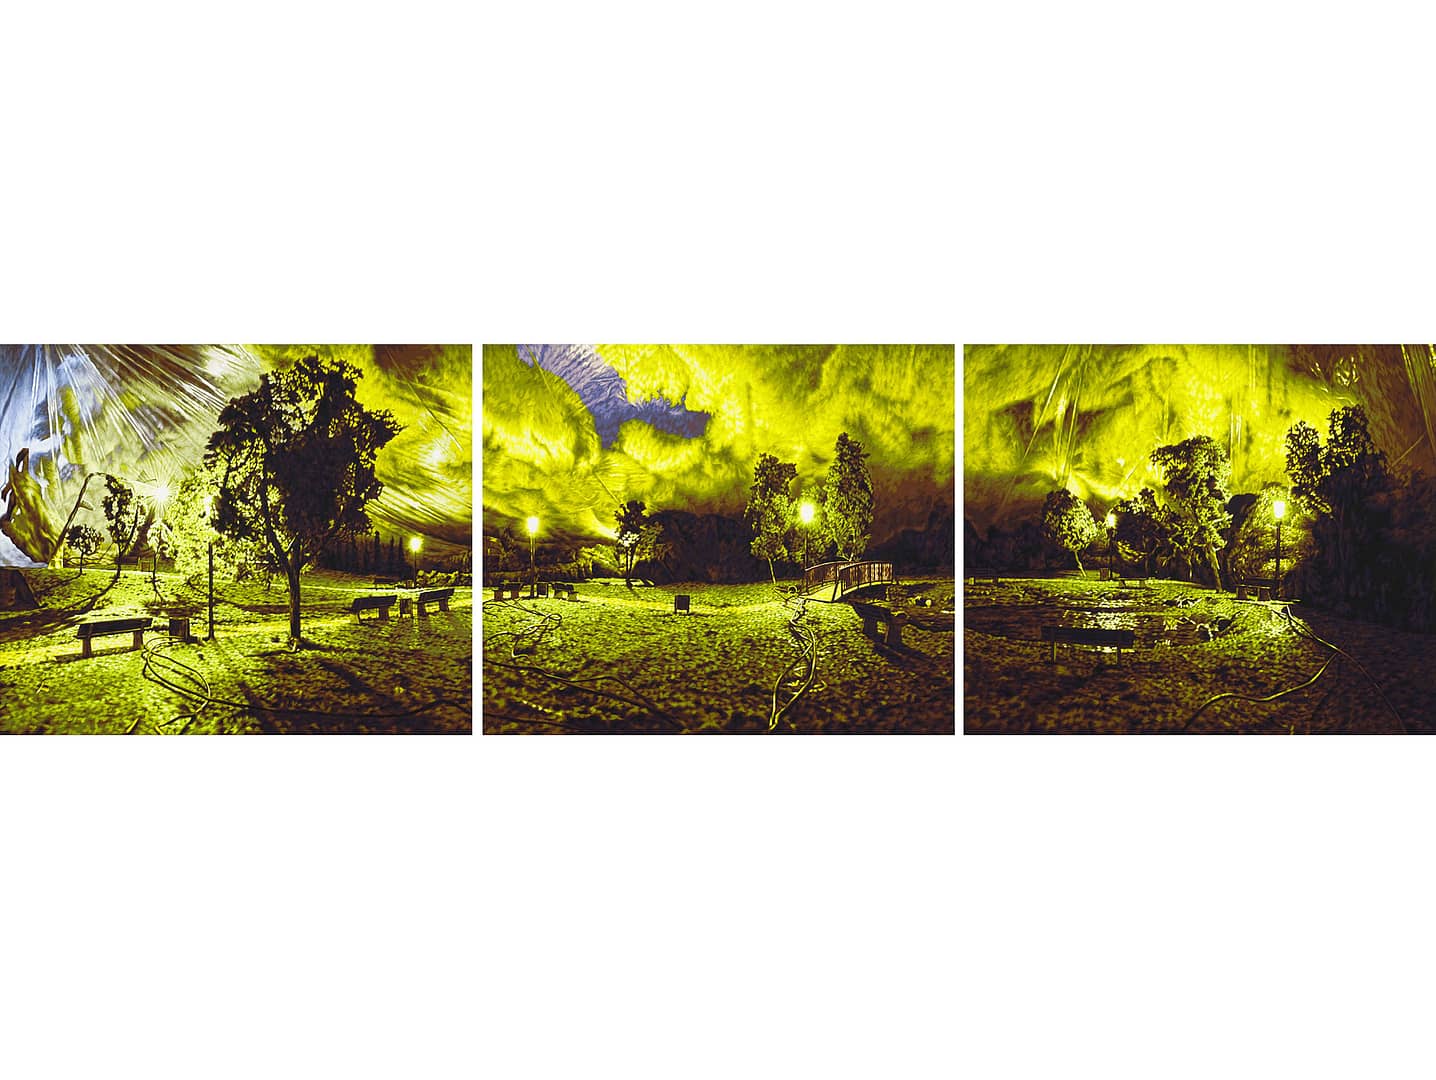 Triptych painting by Philipp Fröhlich (tempera on canvas) showing a wide, nocturnal park landscape. First shown at the solo exhibition "Remote Viewing" at Soledad Lorenzo gallery in 2012.